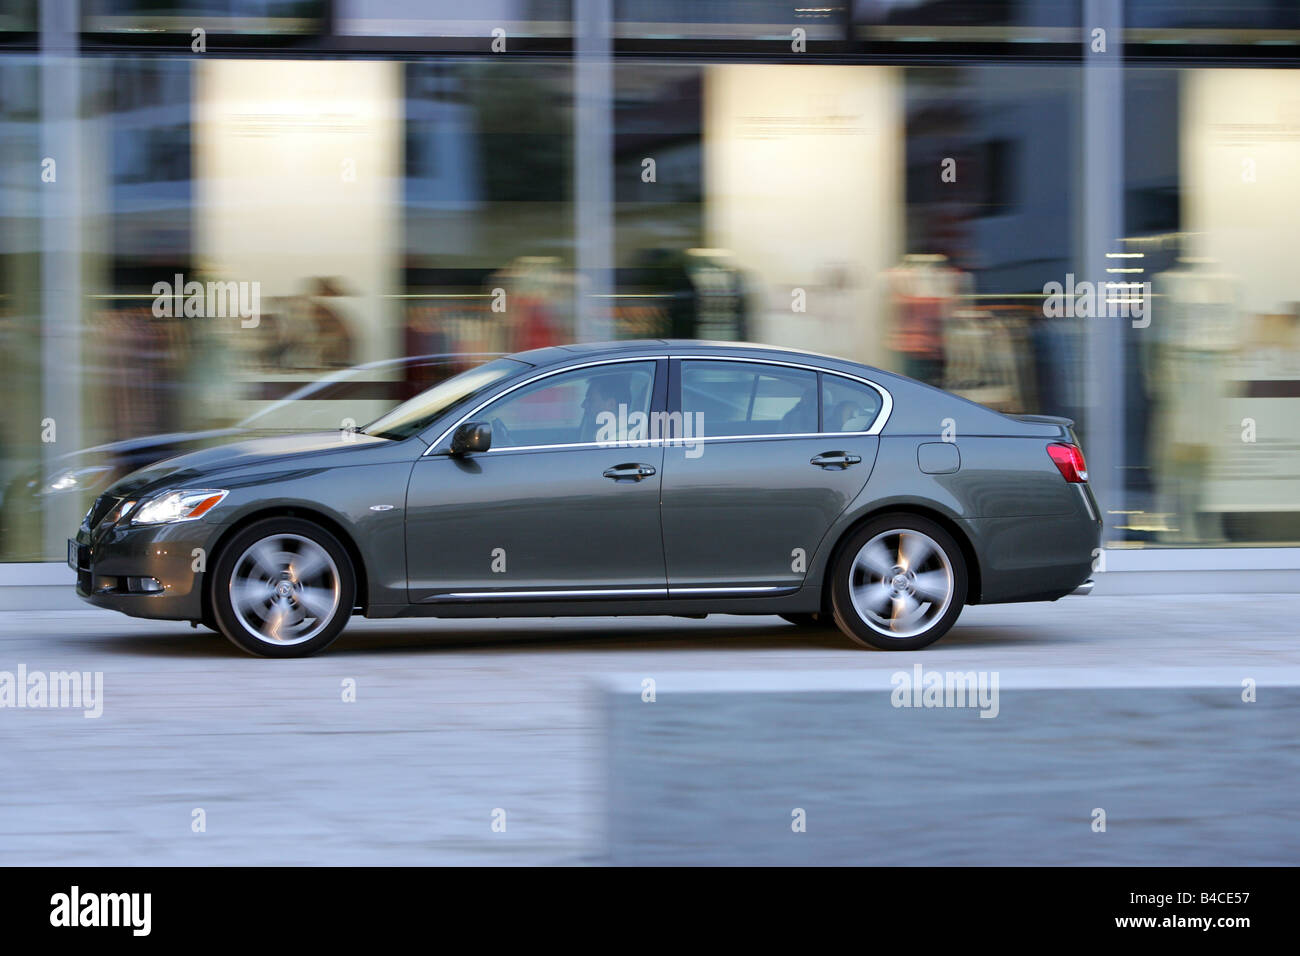 Car, Lexus GS 300, model year 2005-, silver-green, upper middle-sized , Limousine, driving, side view, City, photographer: Hans Stock Photo